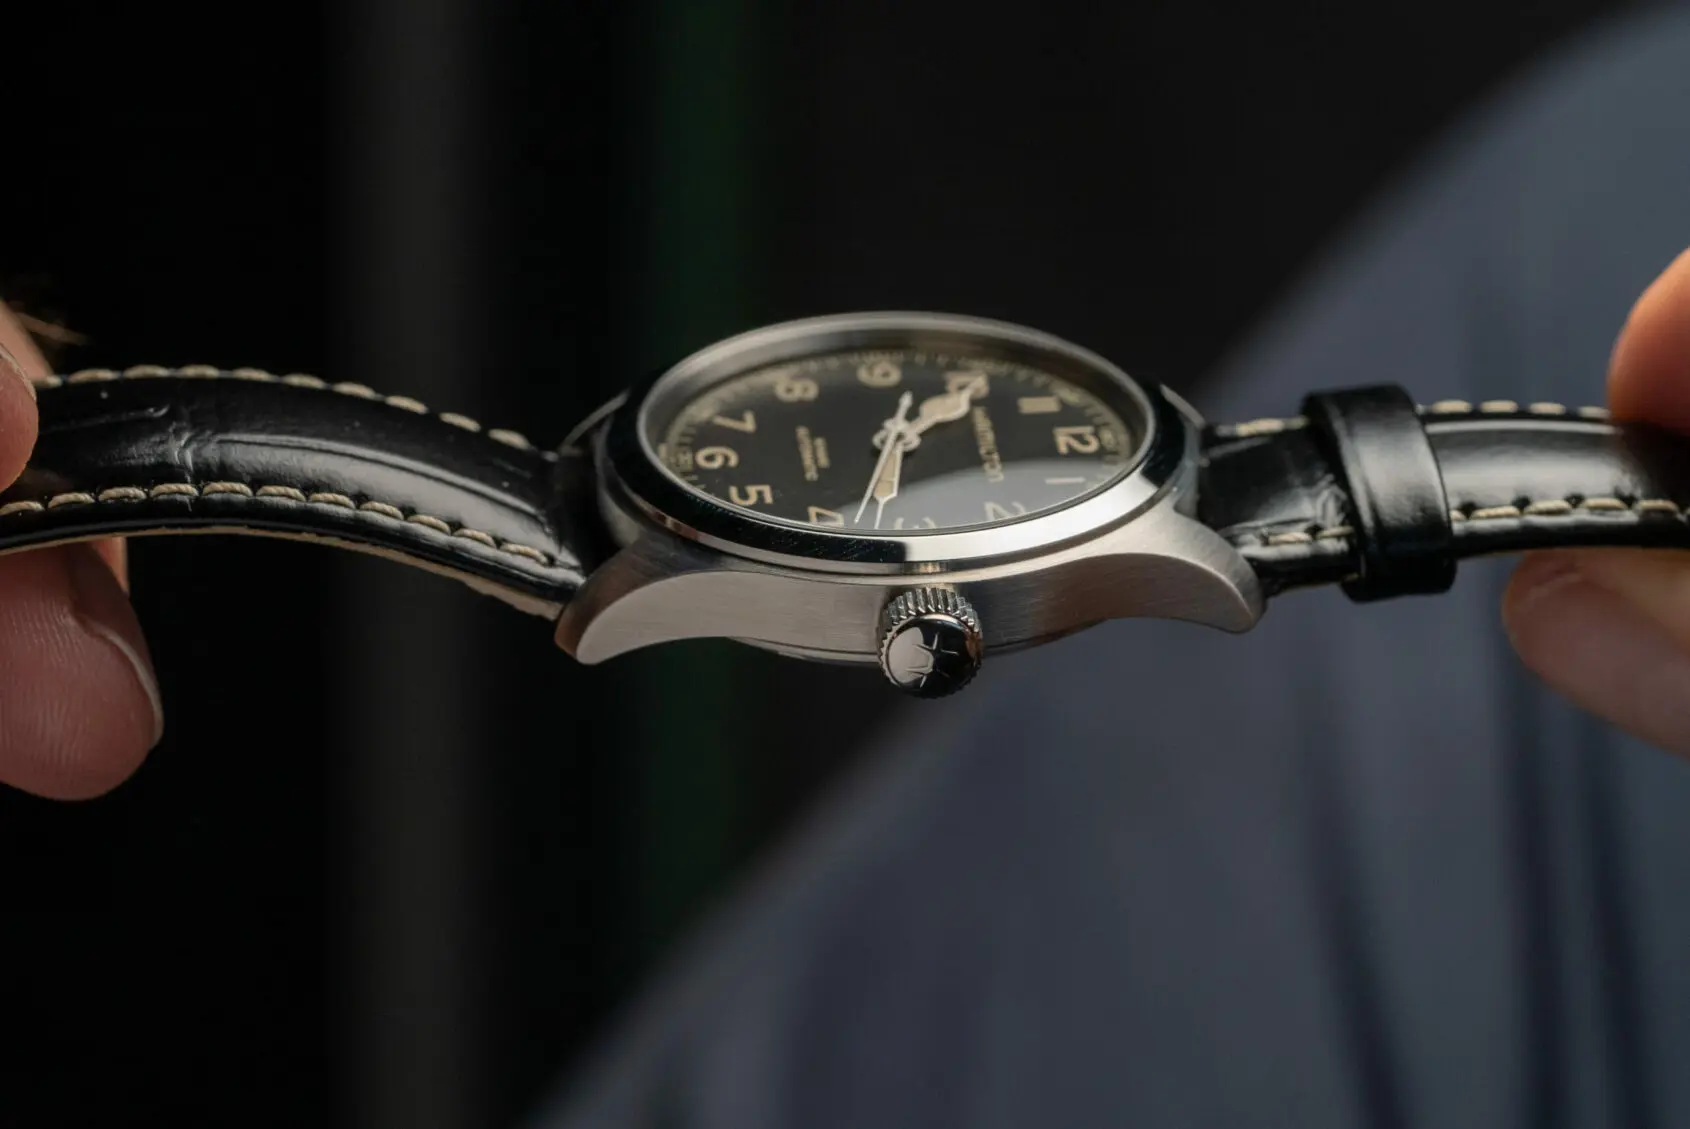 The Hamilton Murph 38 Review: A Great Watch For Under $1,000